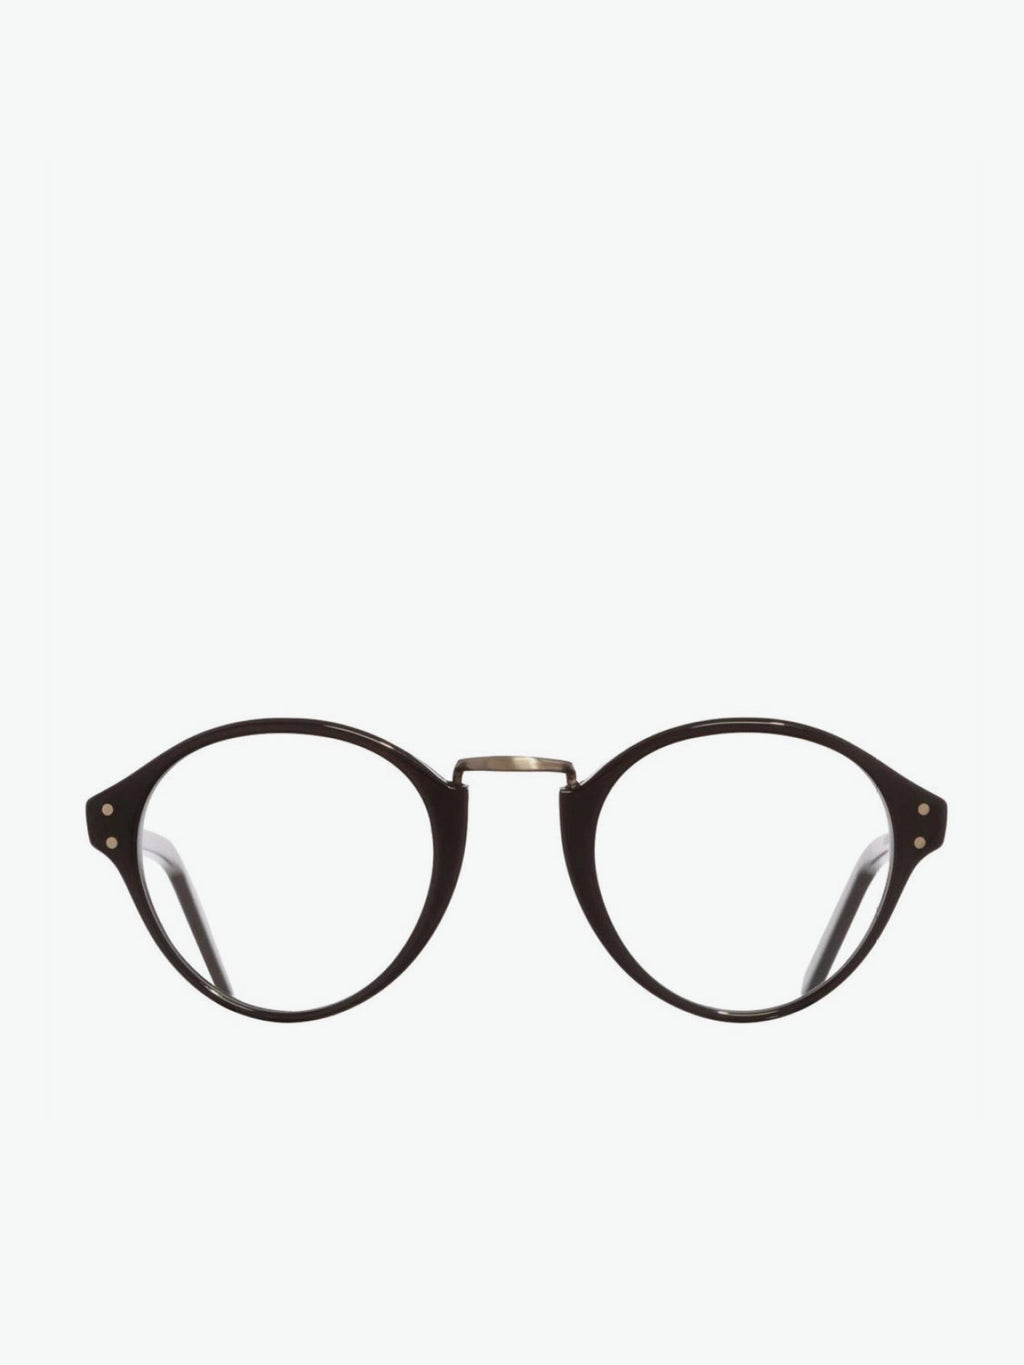 Cutler and Gross Oval-Frame Black Acetate Optical Glasses | A